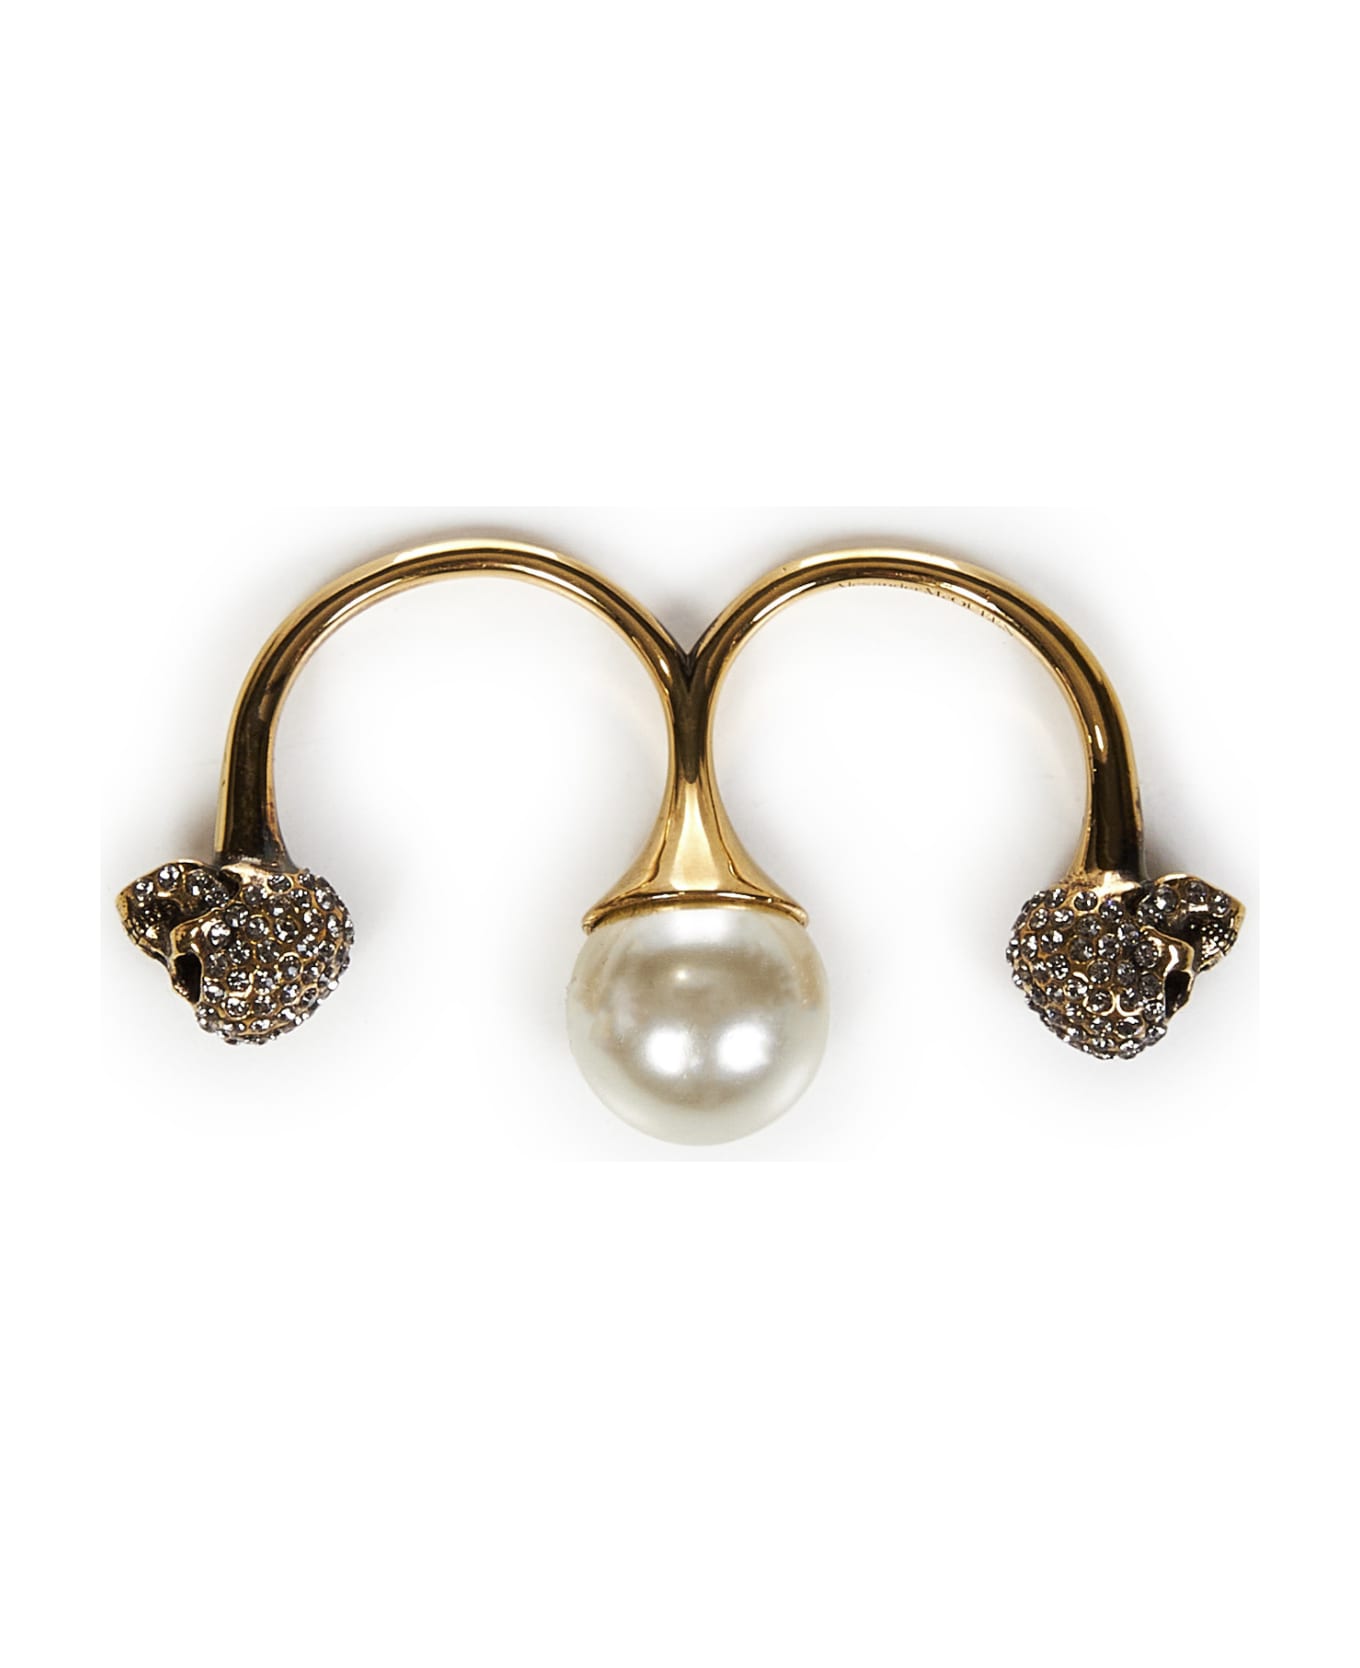 Alexander McQueen Antiqued Gold Double Pearl Skull Ring - Oro